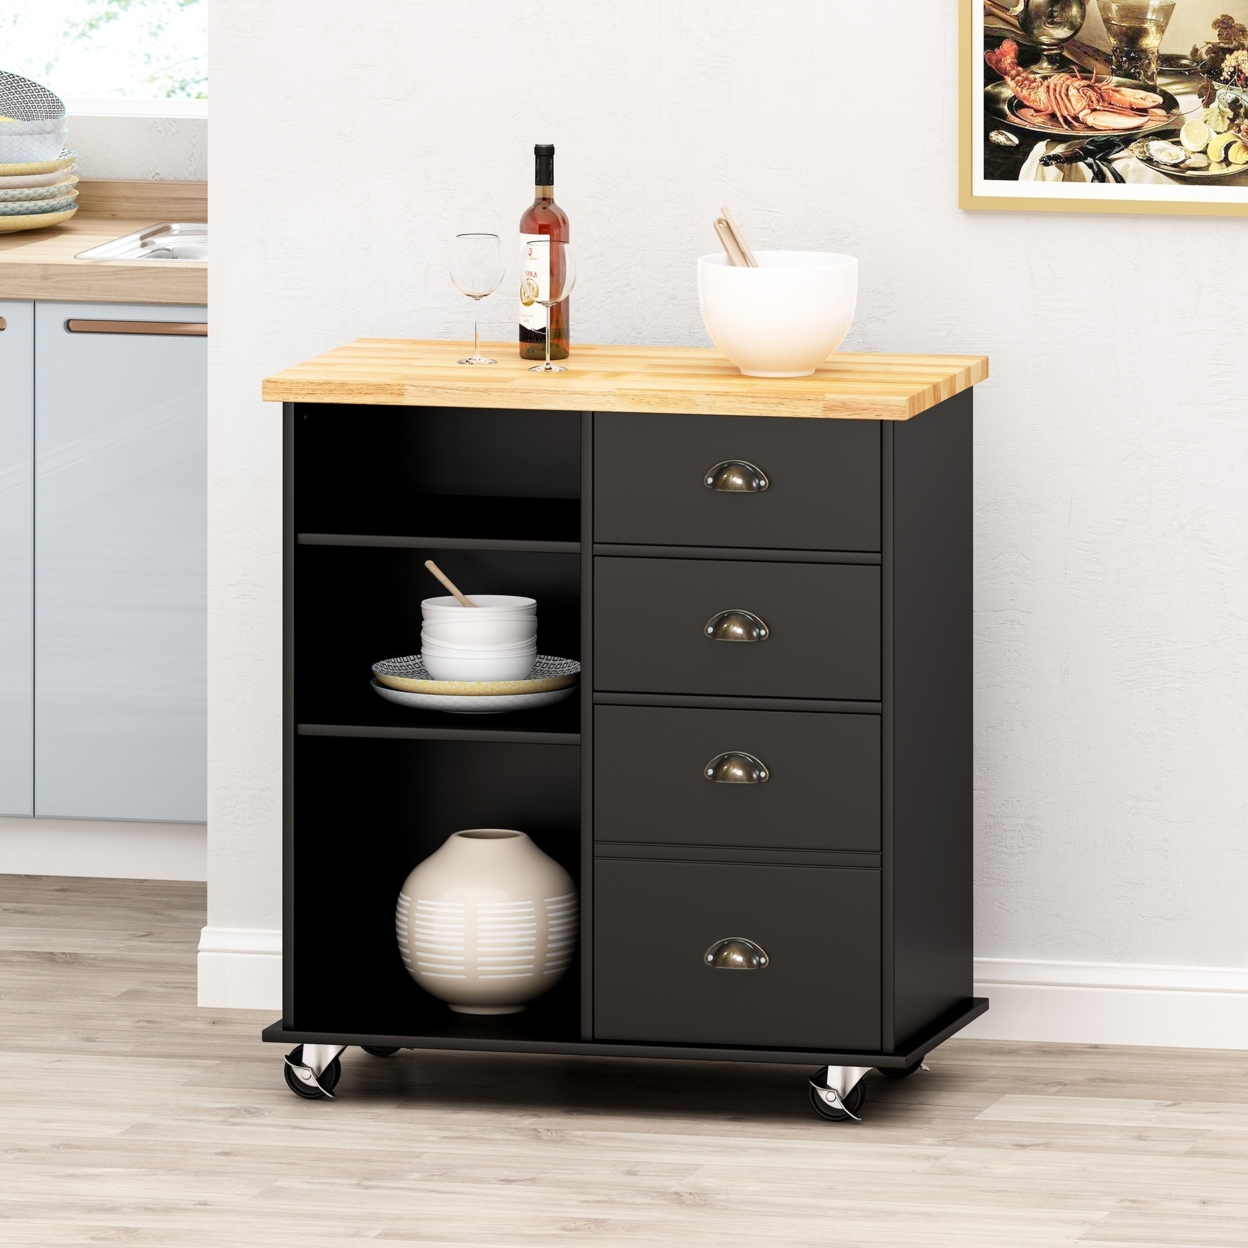 Yohaan Contemporary Kitchen Cart With Wheels - Black/natural